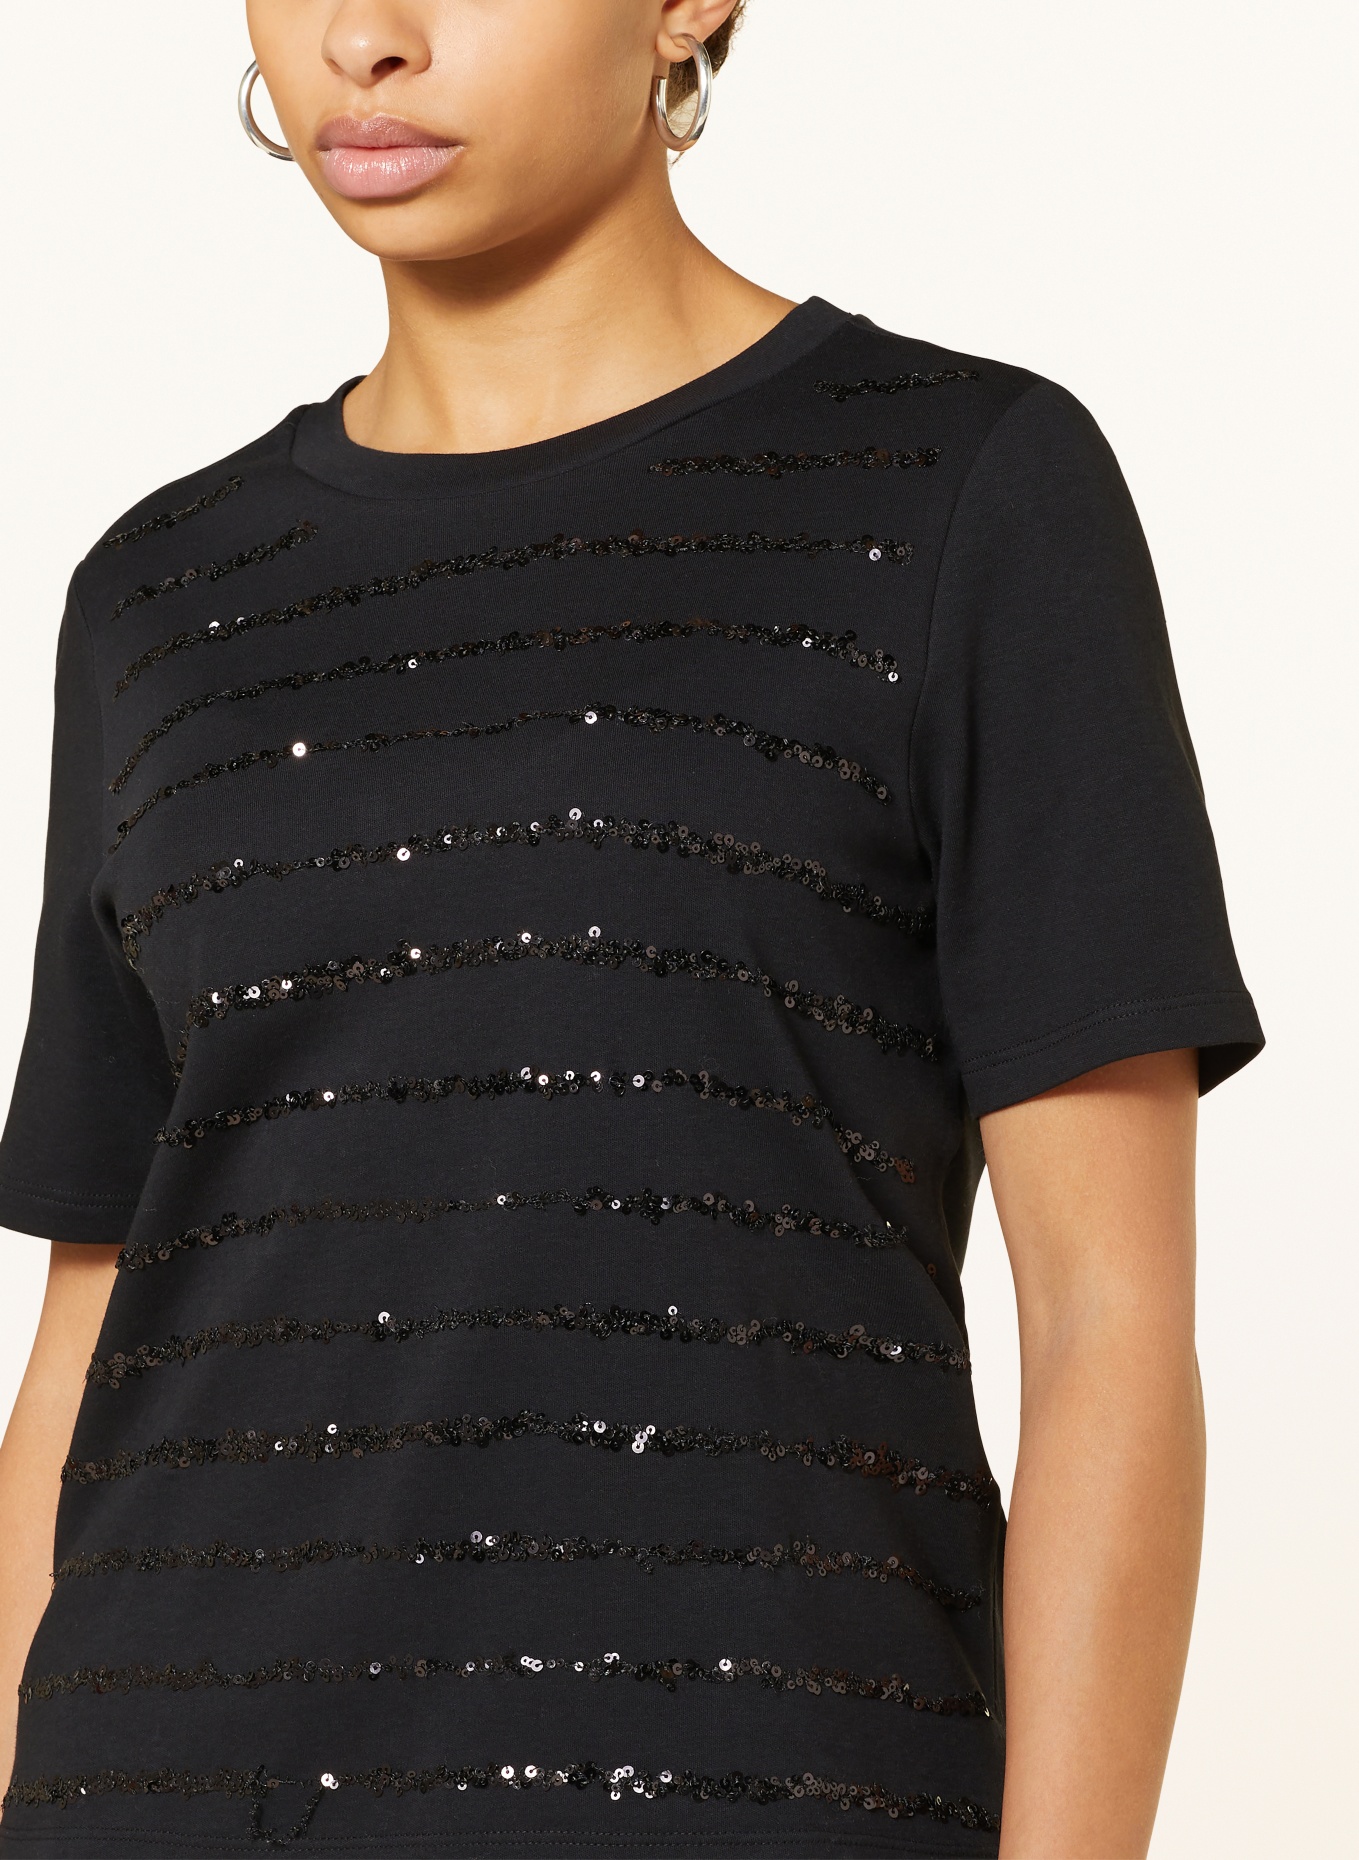 Barzahlung s.Oliver BLACK in sequins LABEL with black T-shirt